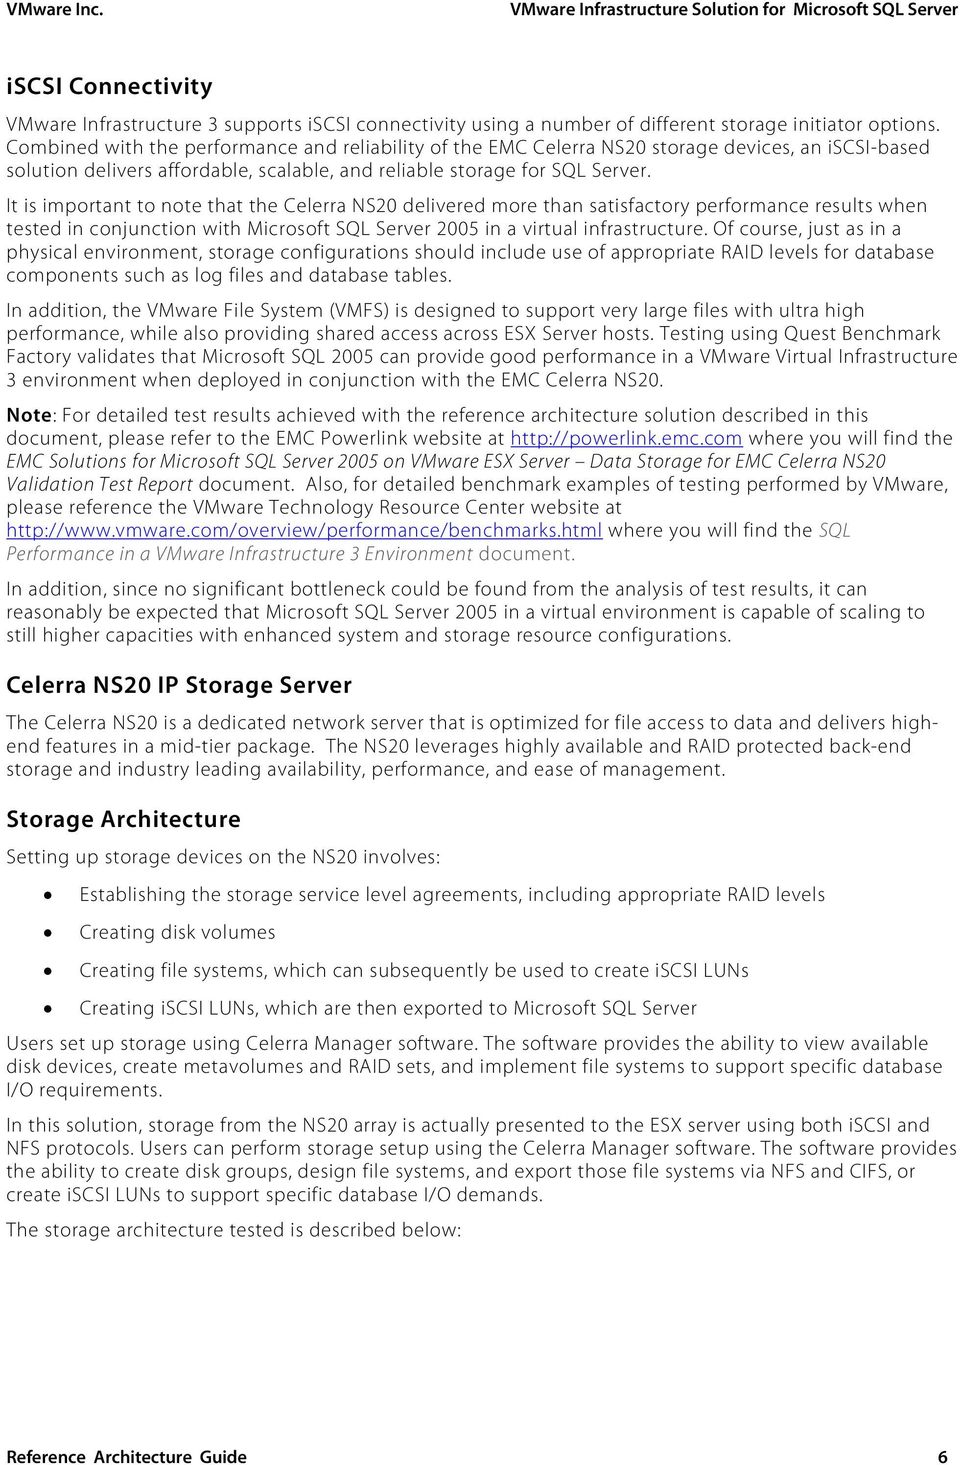 It is important to note that the Celerra NS20 delivered more than satisfactory performance results when tested in conjunction with Microsoft SQL Server 2005 in a virtual infrastructure.